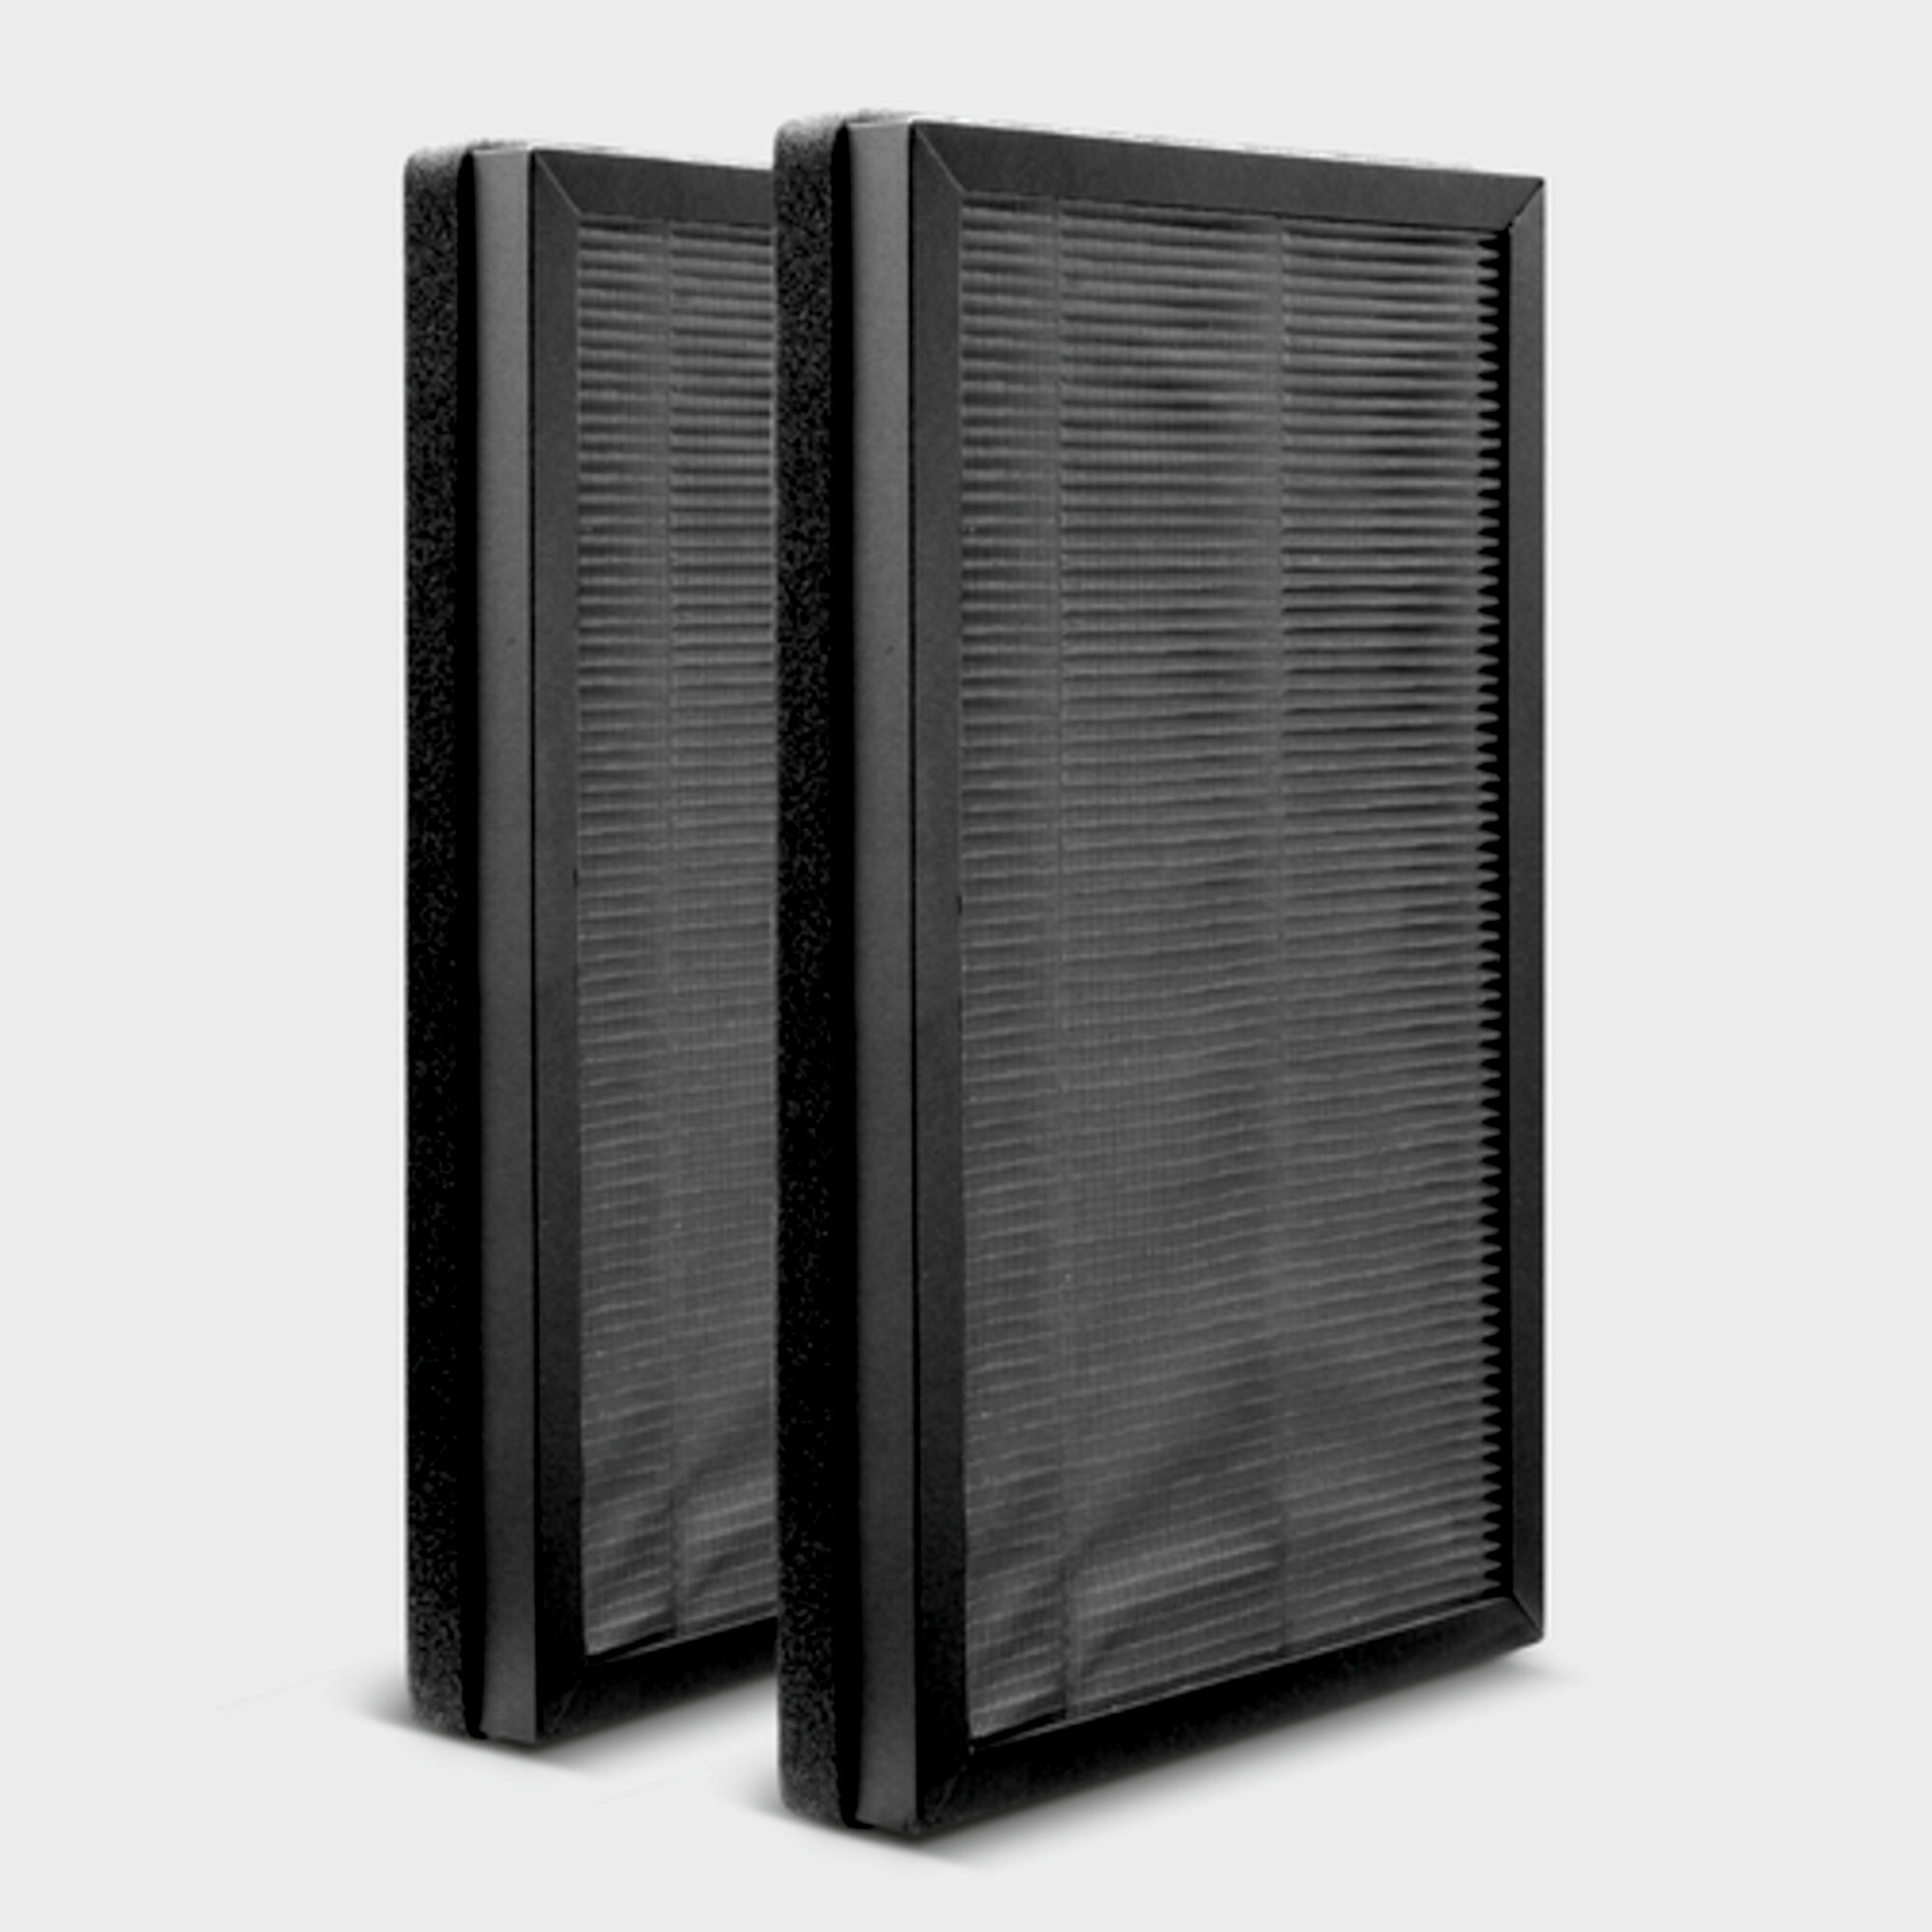 Air purifier AF 20: High Protect 13 Filter